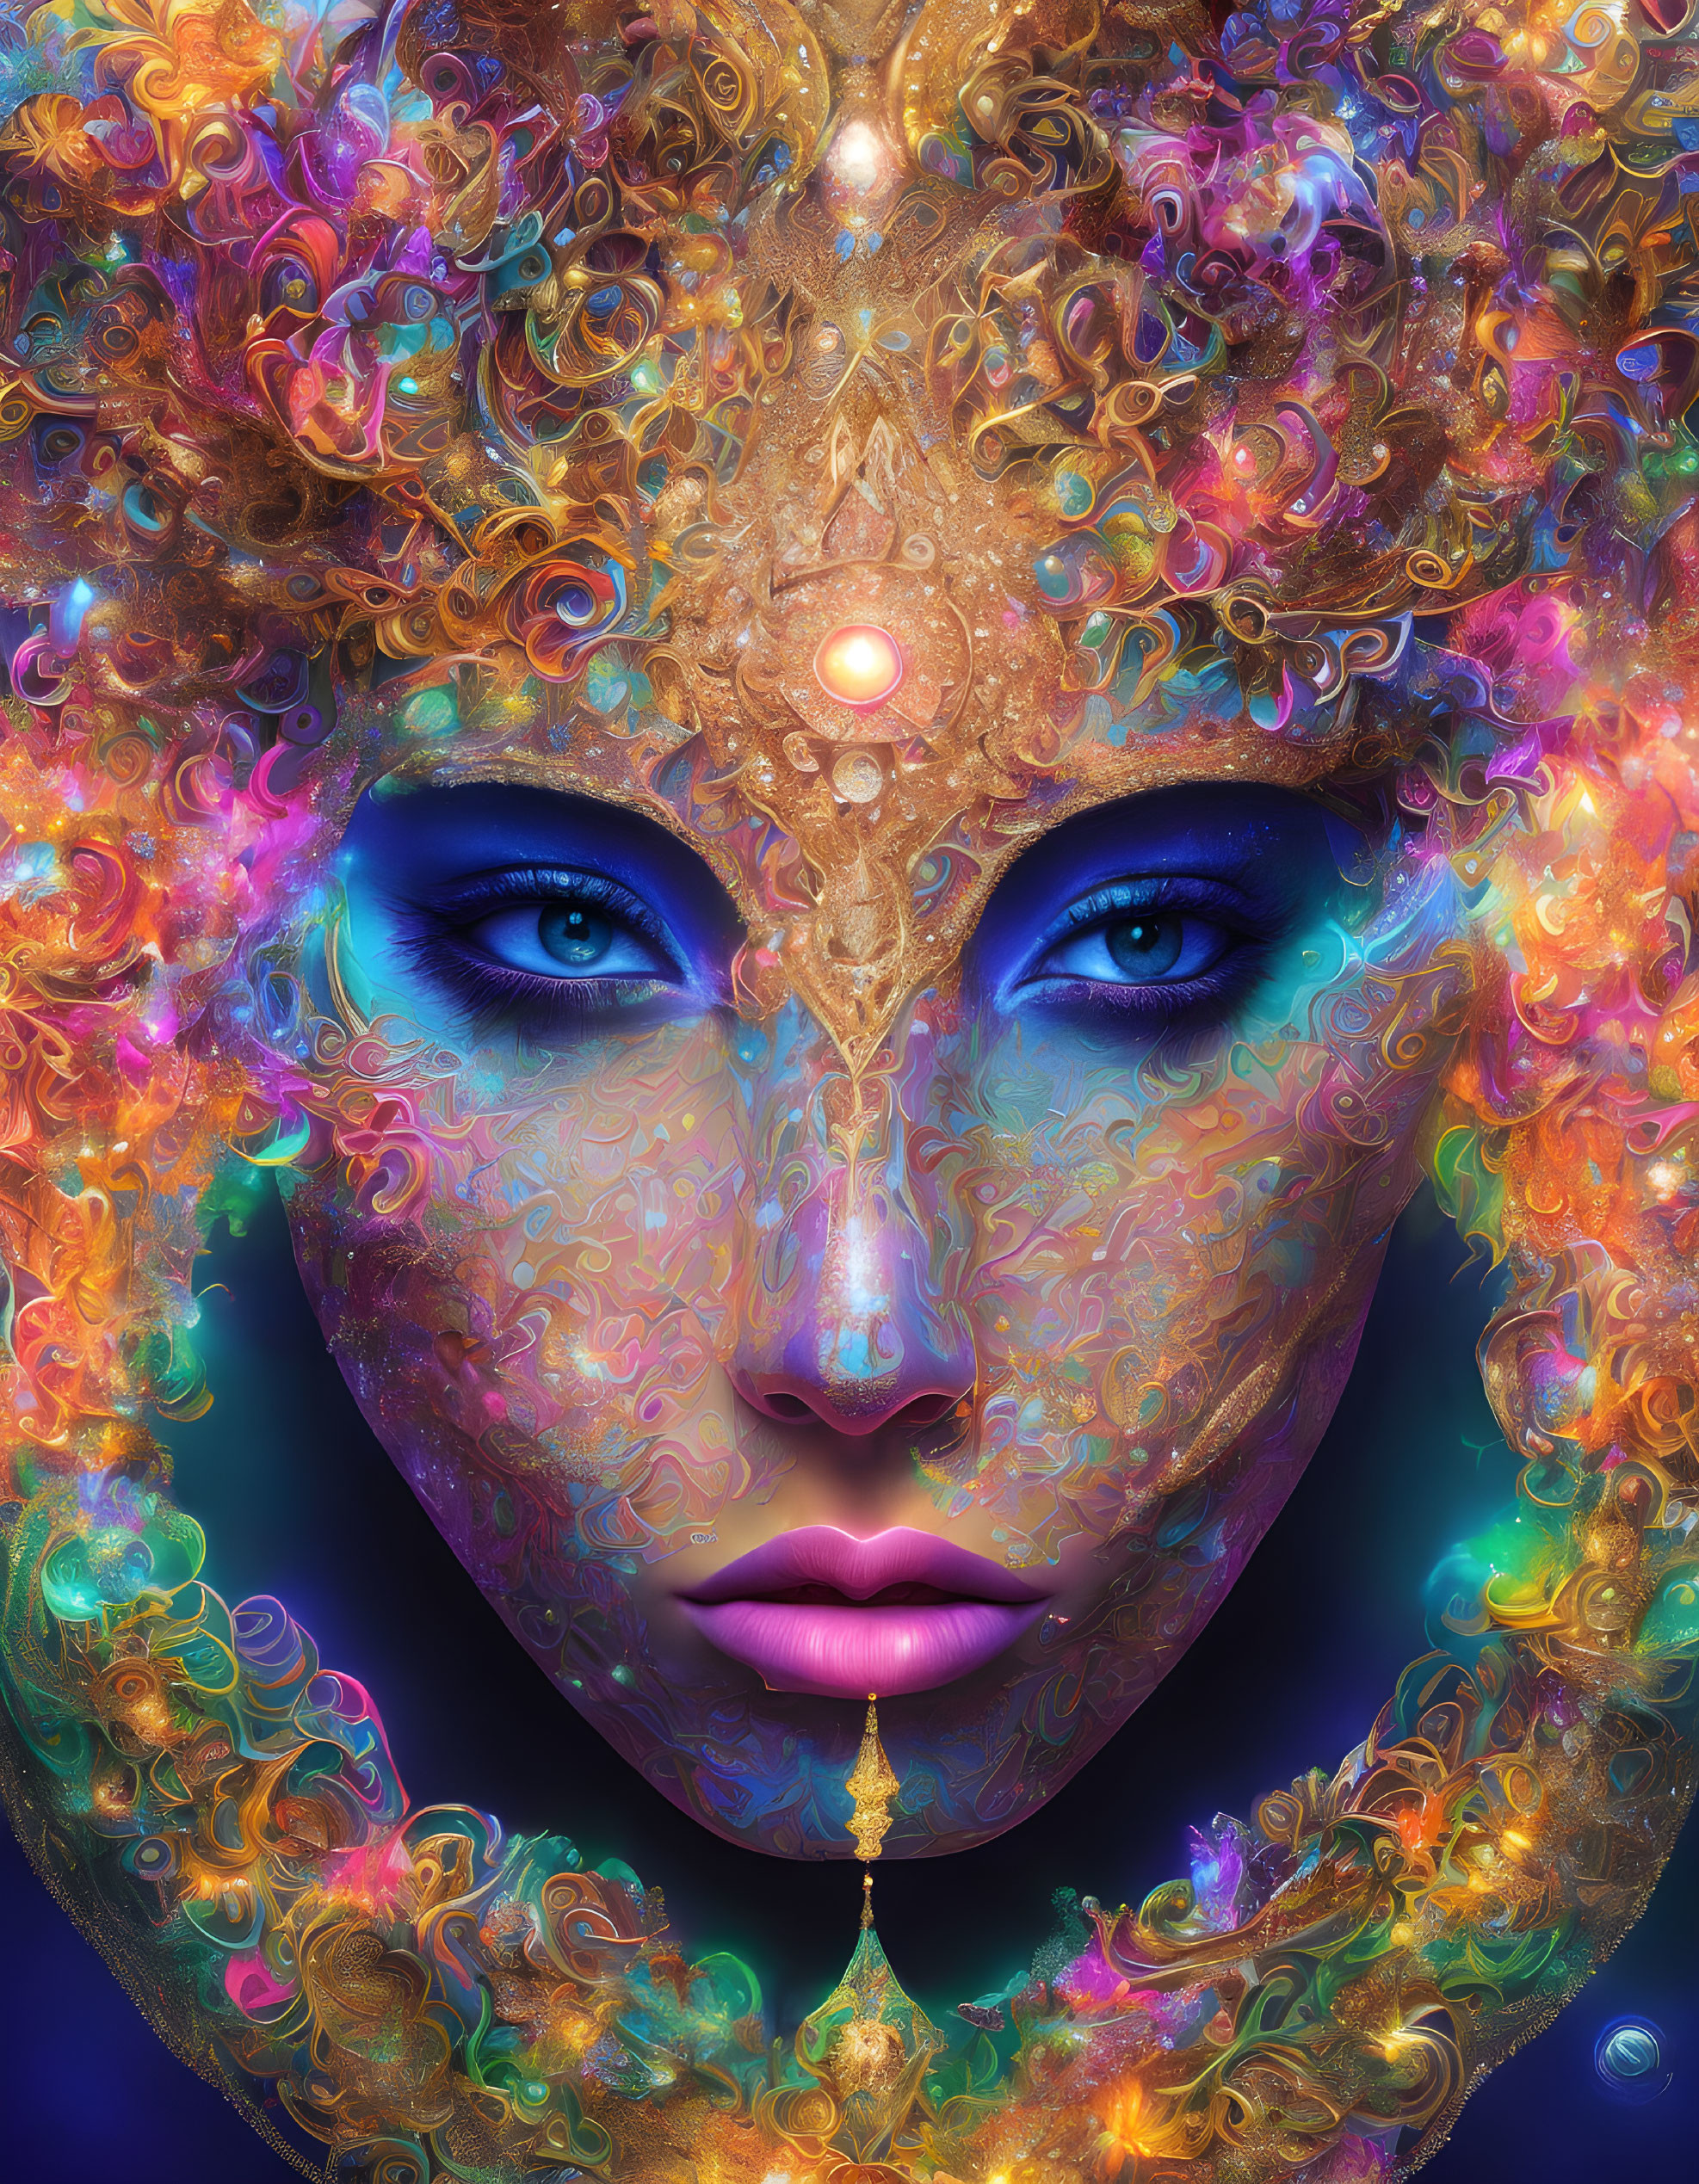 Detailed digital artwork of face with golden headgear, blue eyes, and colorful patterns